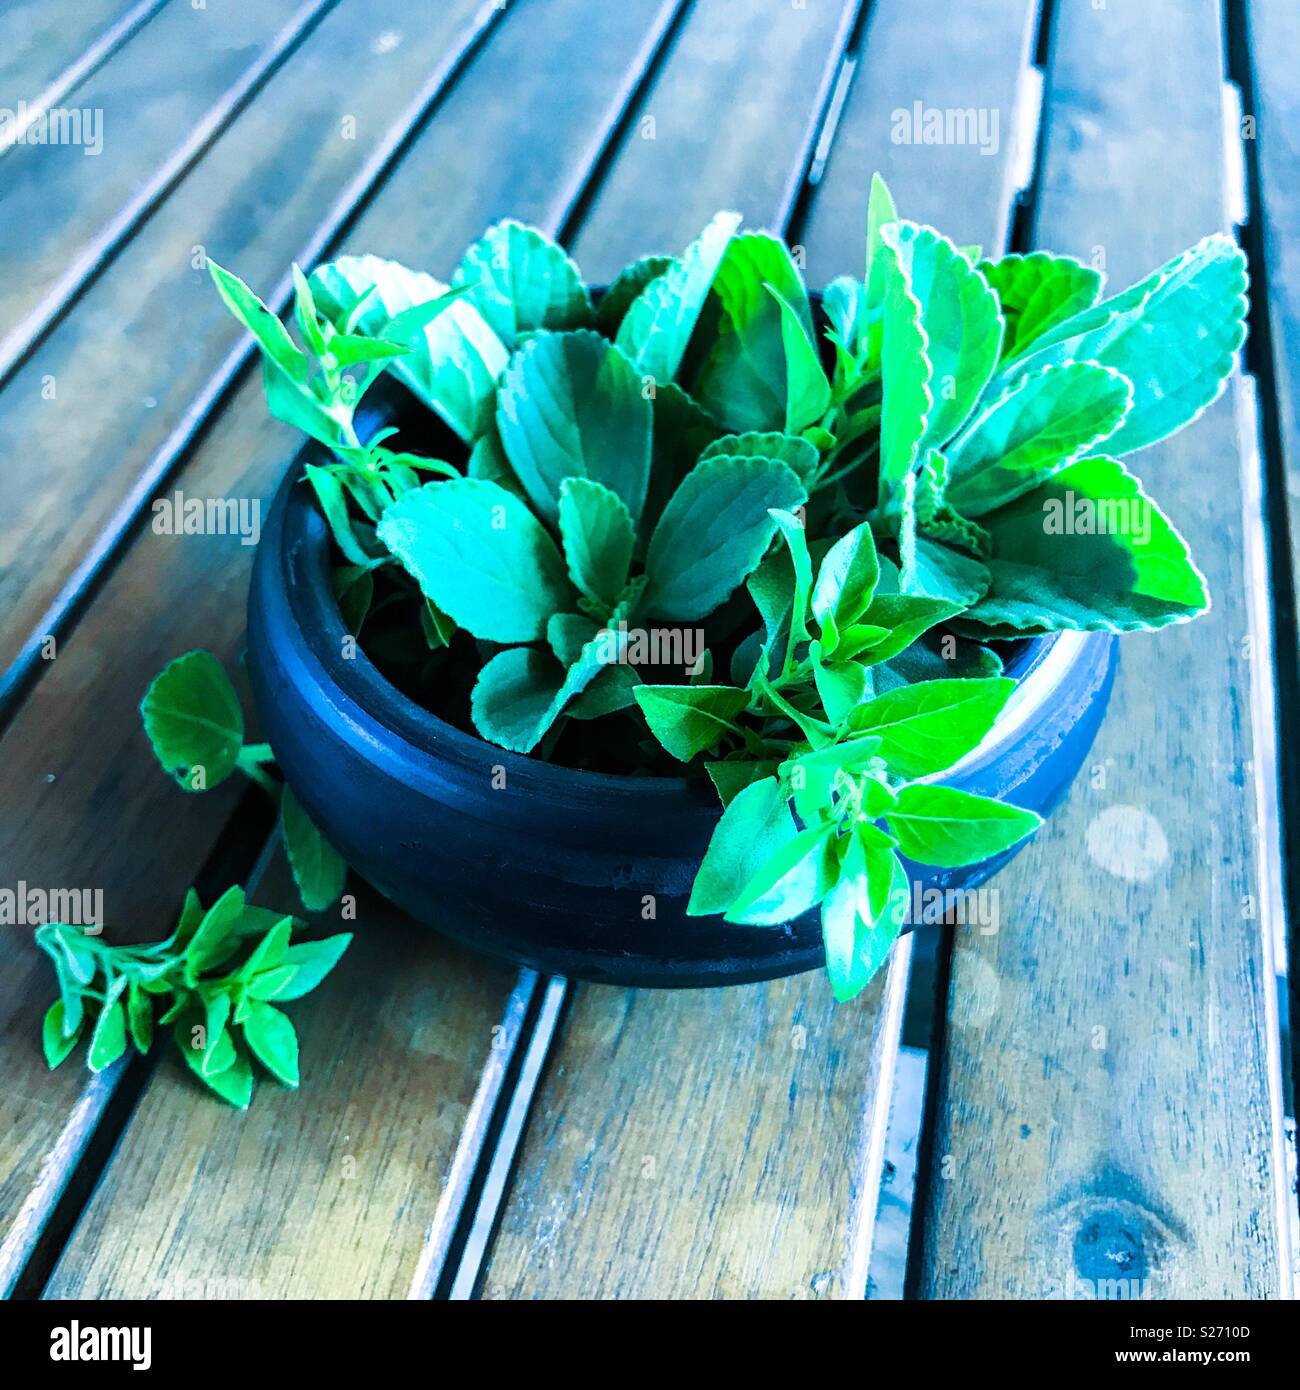 Herbs in a small dark terracotta pot on a wooden table in dark blue tint Stock Photo